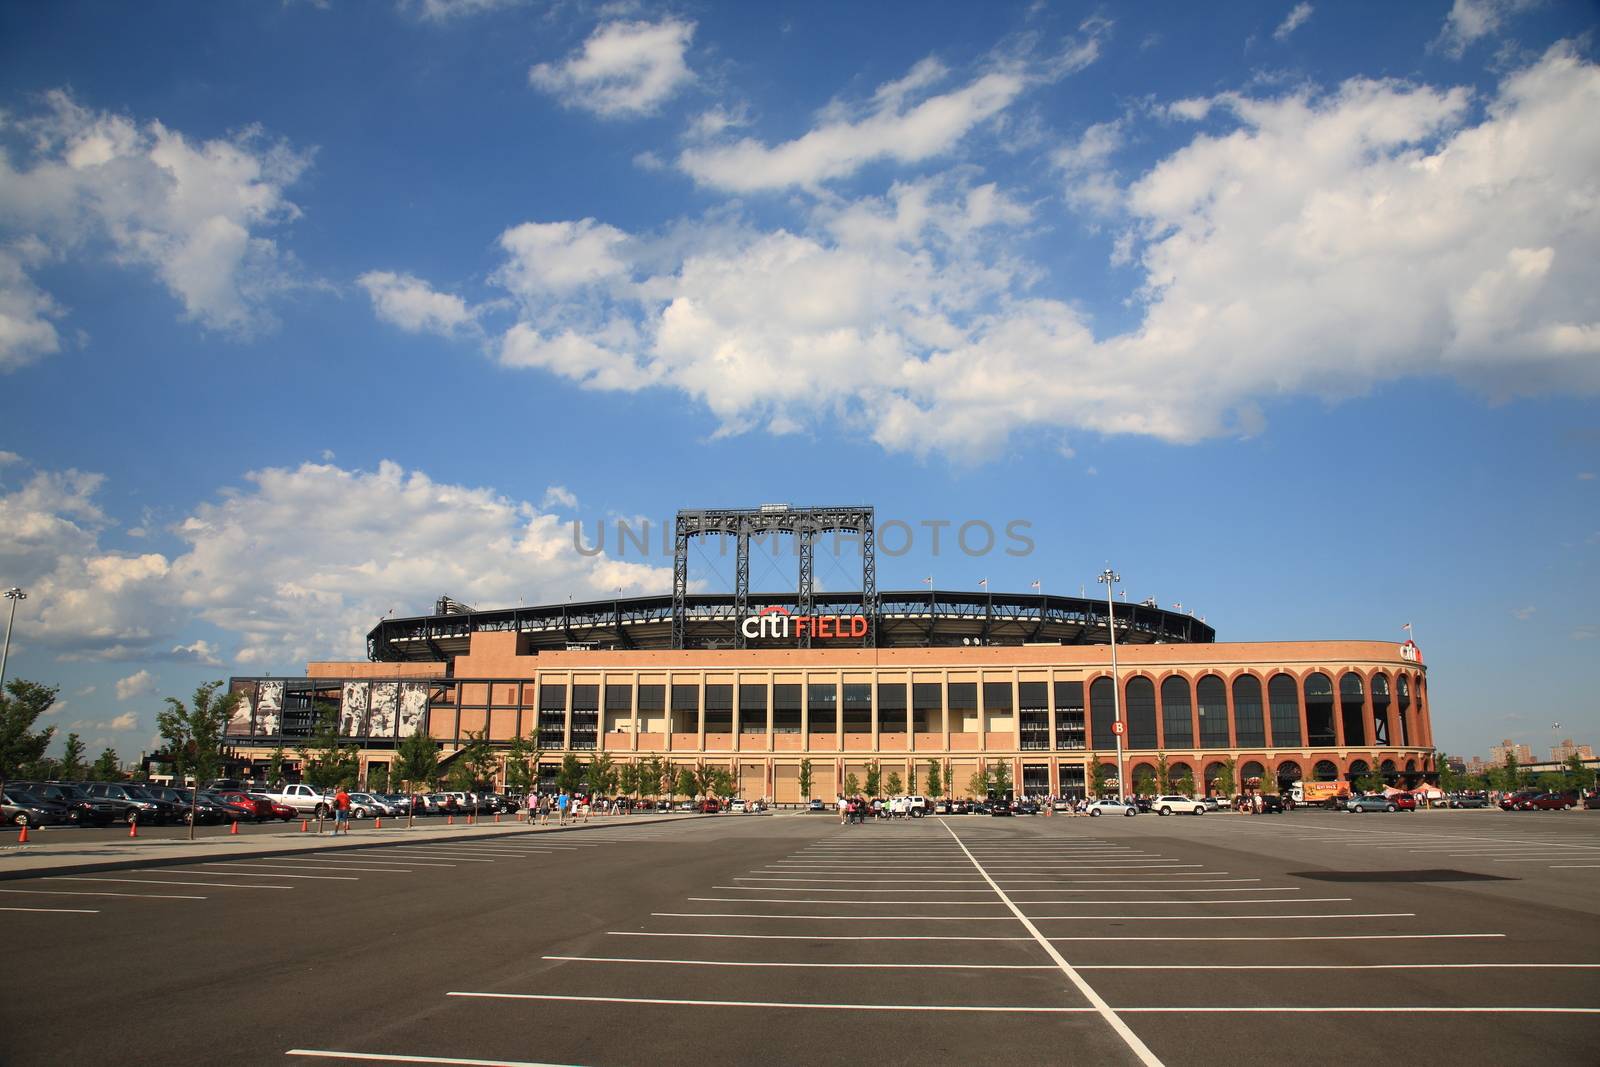 Citi Field, home of the NY Mets in Flushing, Queens.